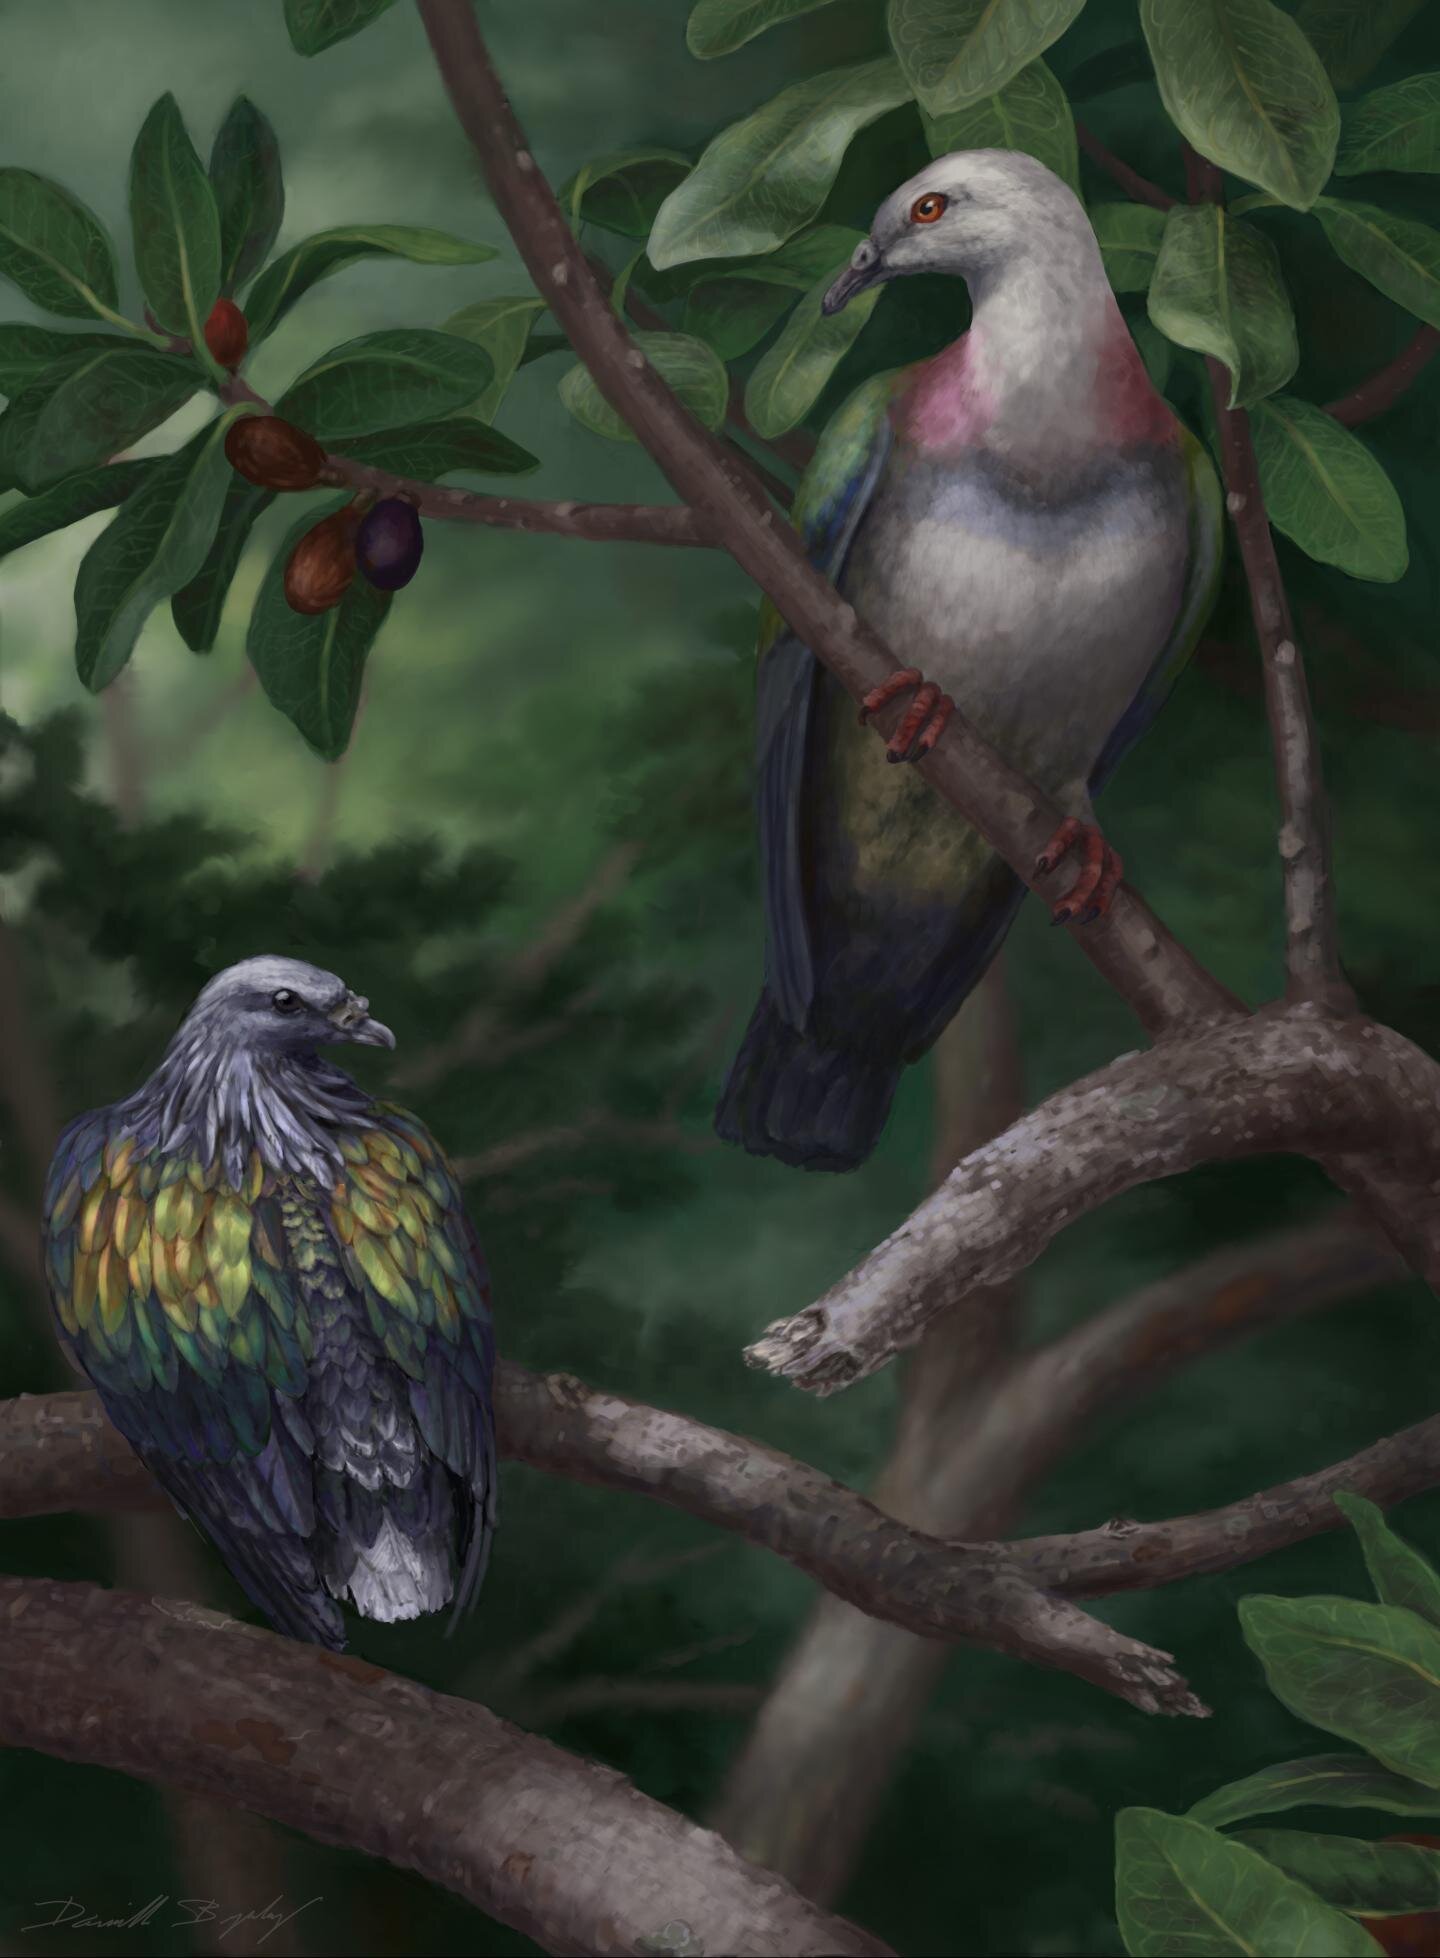 Giant, fruit-gulping pigeon eaten into extinction on Pacific islands